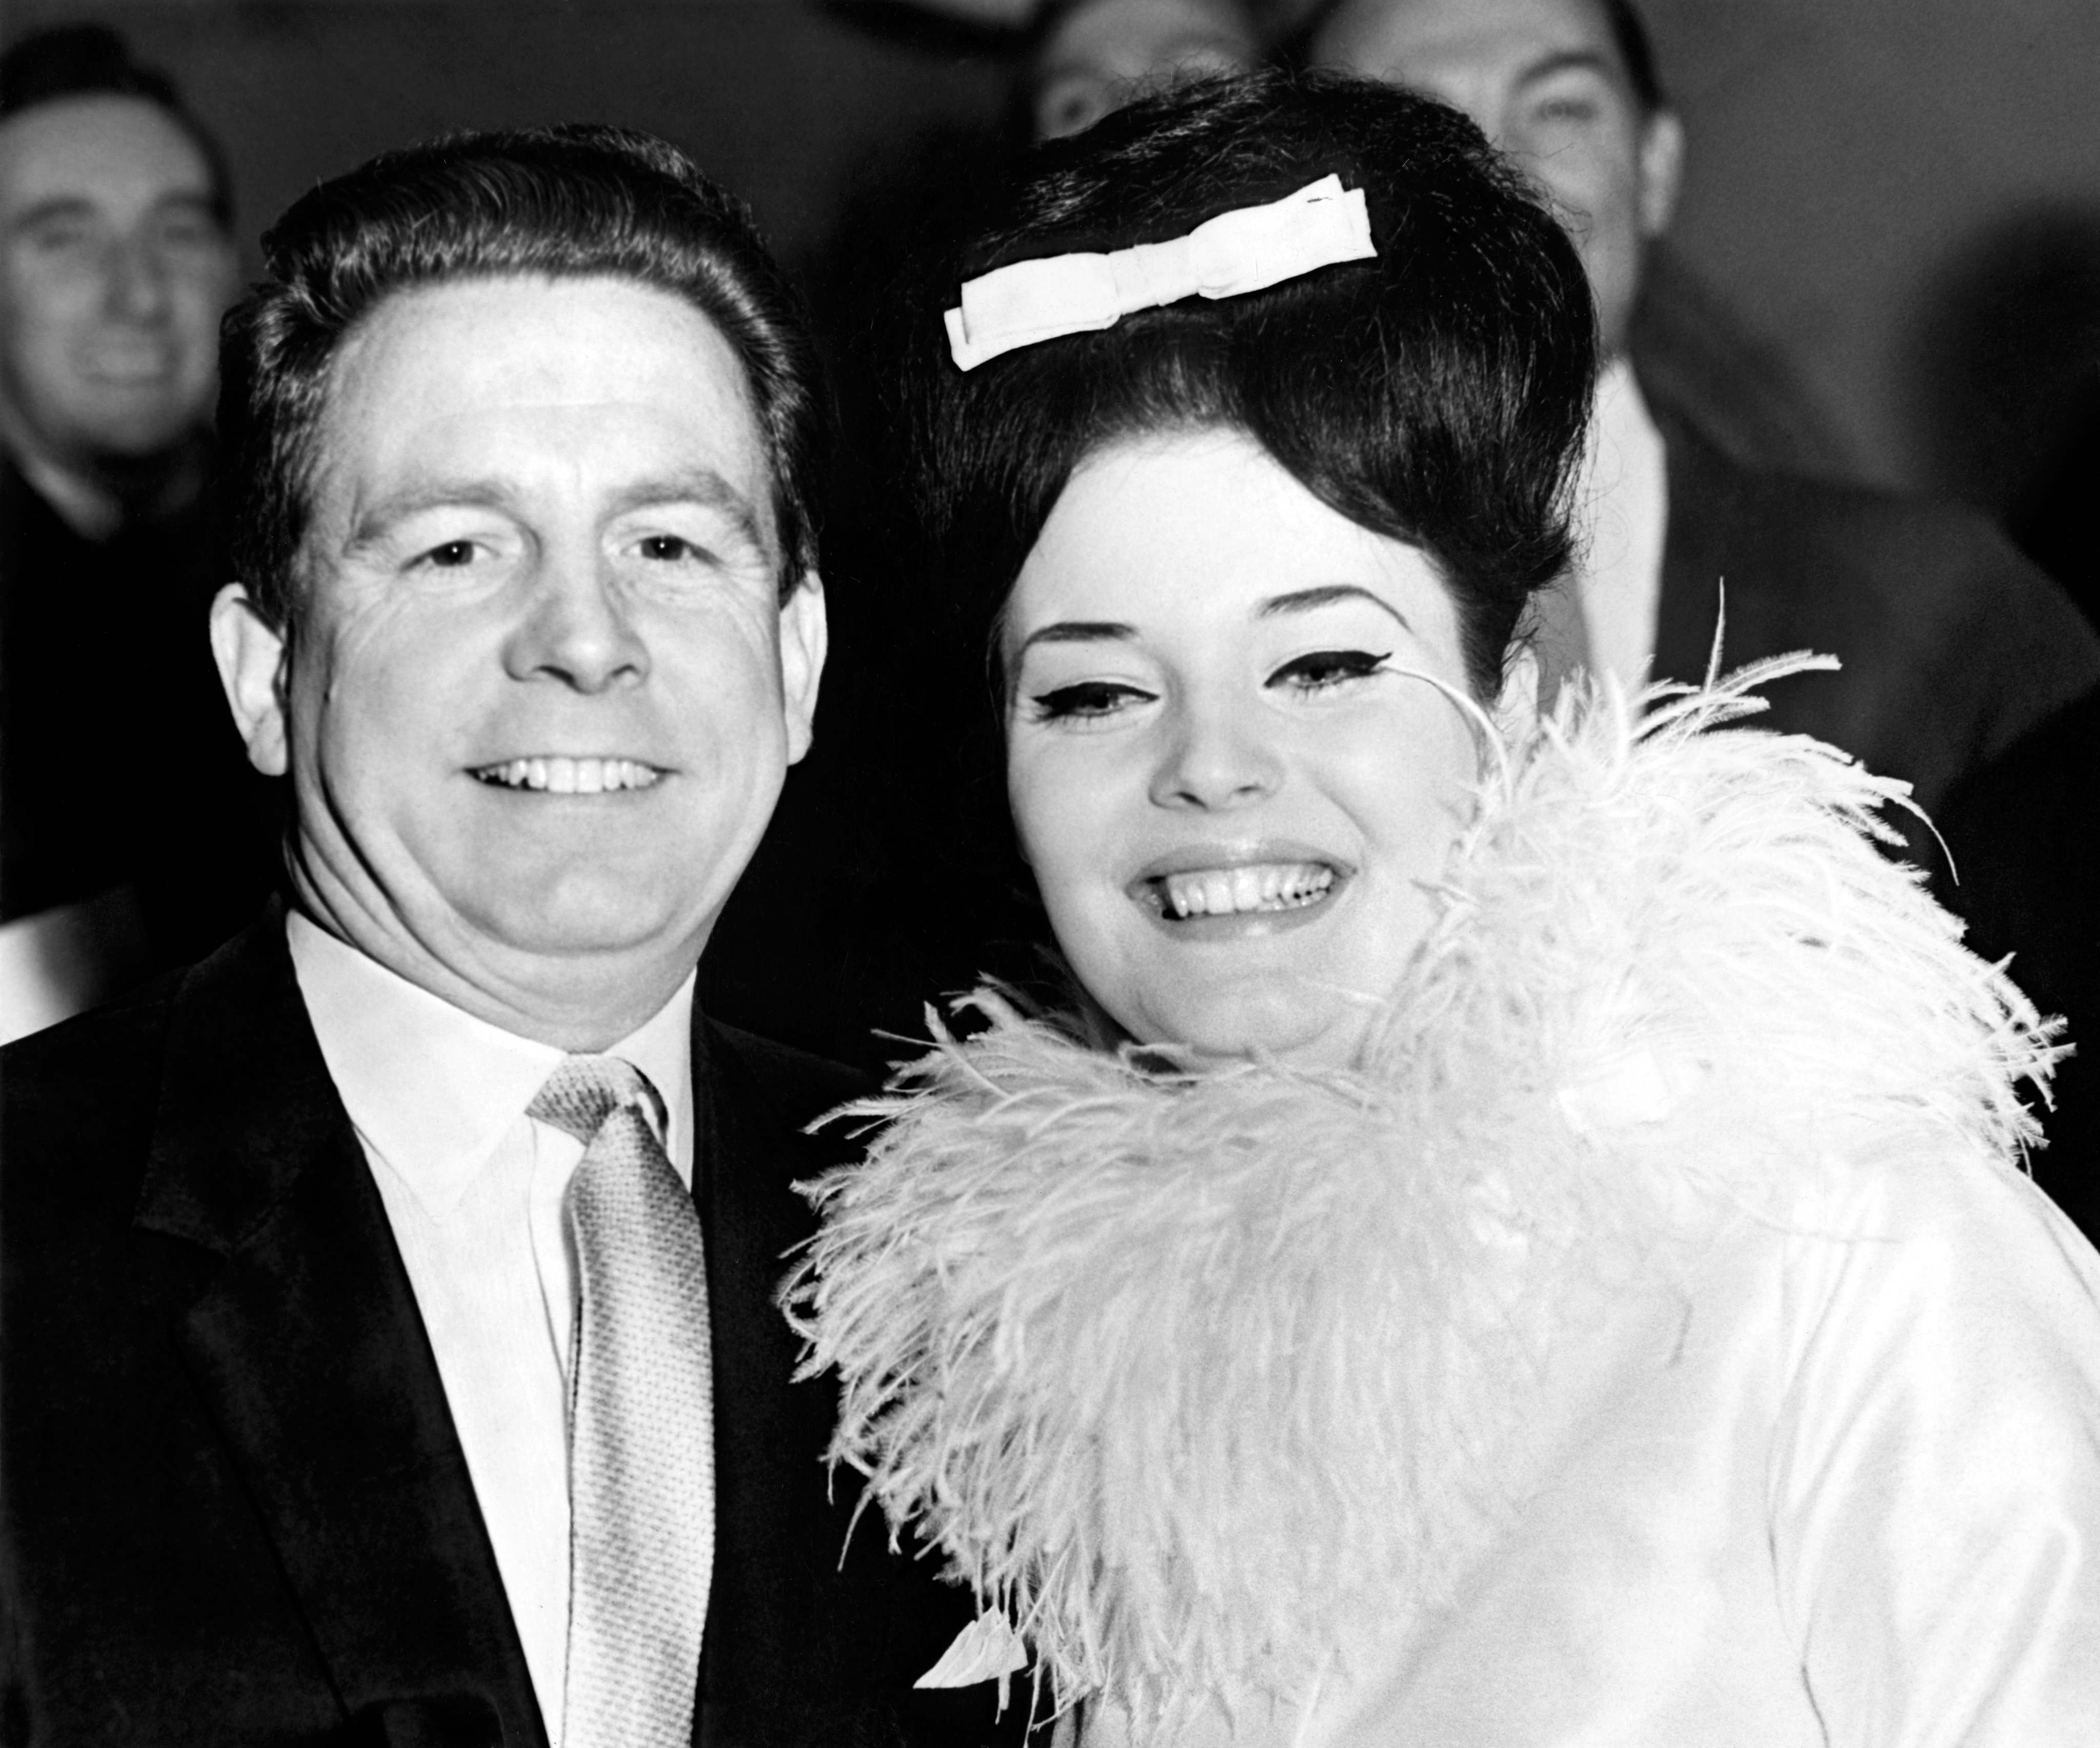 20 year old 1961 Miss World Rosemarie Frankland and her new husband Ben Jones, a journalist and sixteen years her senior, leave after the ceremony at Caxton Hall. The marriage was unable to survive her hectic lifestyle (ie having an affair with Bob Hope) and he filed for divorce six months later on the grounds of adultery.